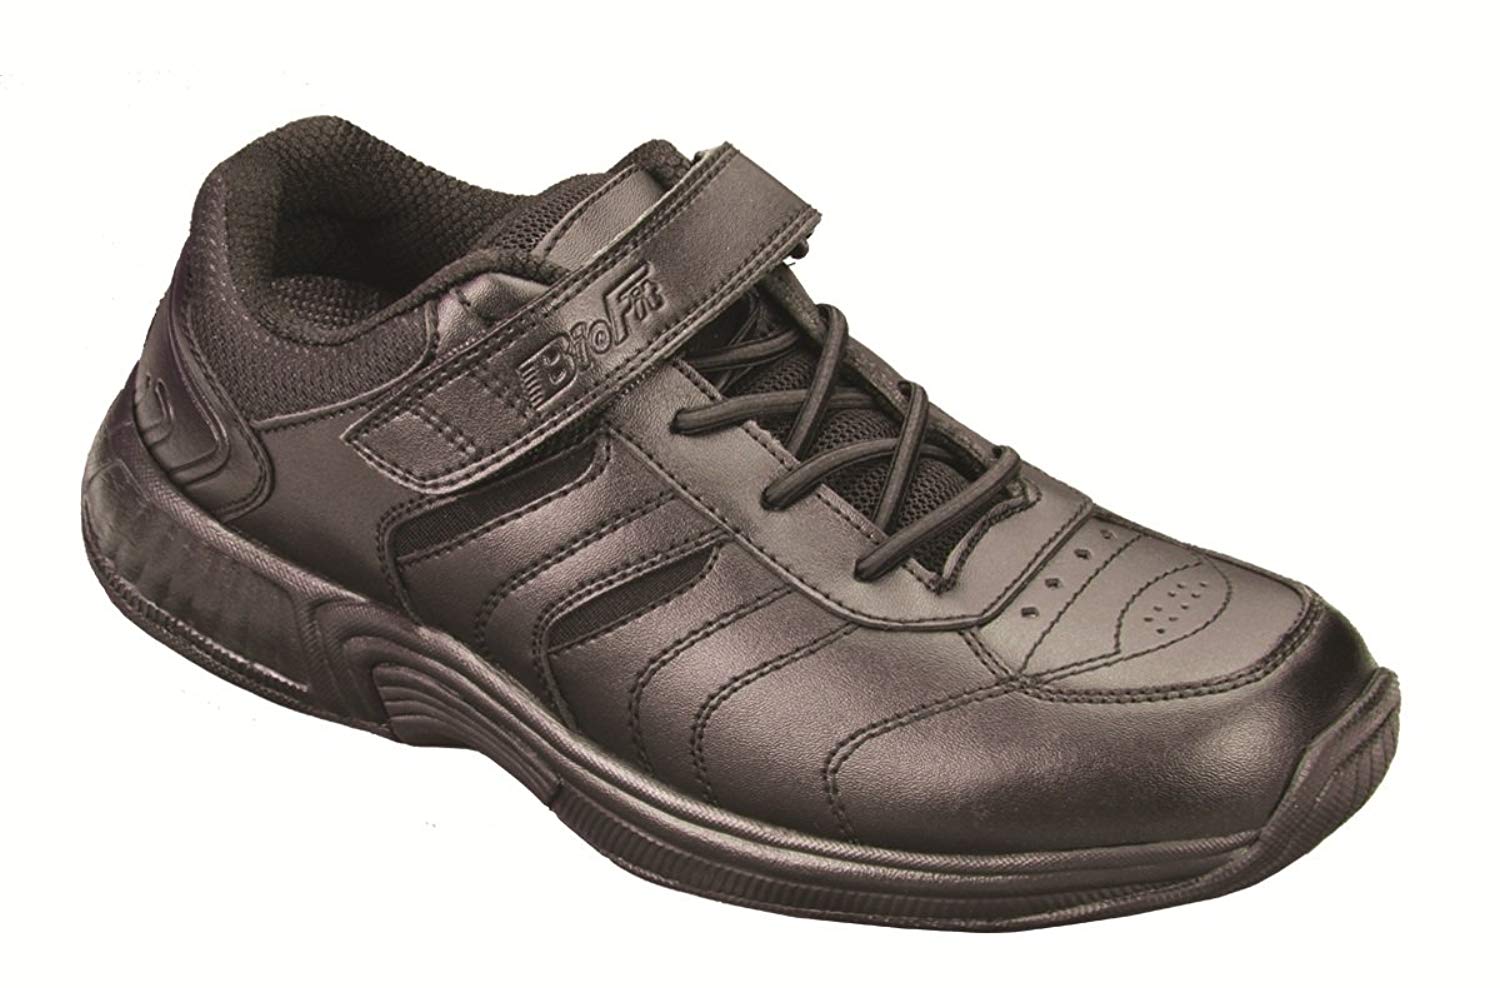 Orthofeet Men's Athletic - Tie-less Lace Shoes - Free Shipping